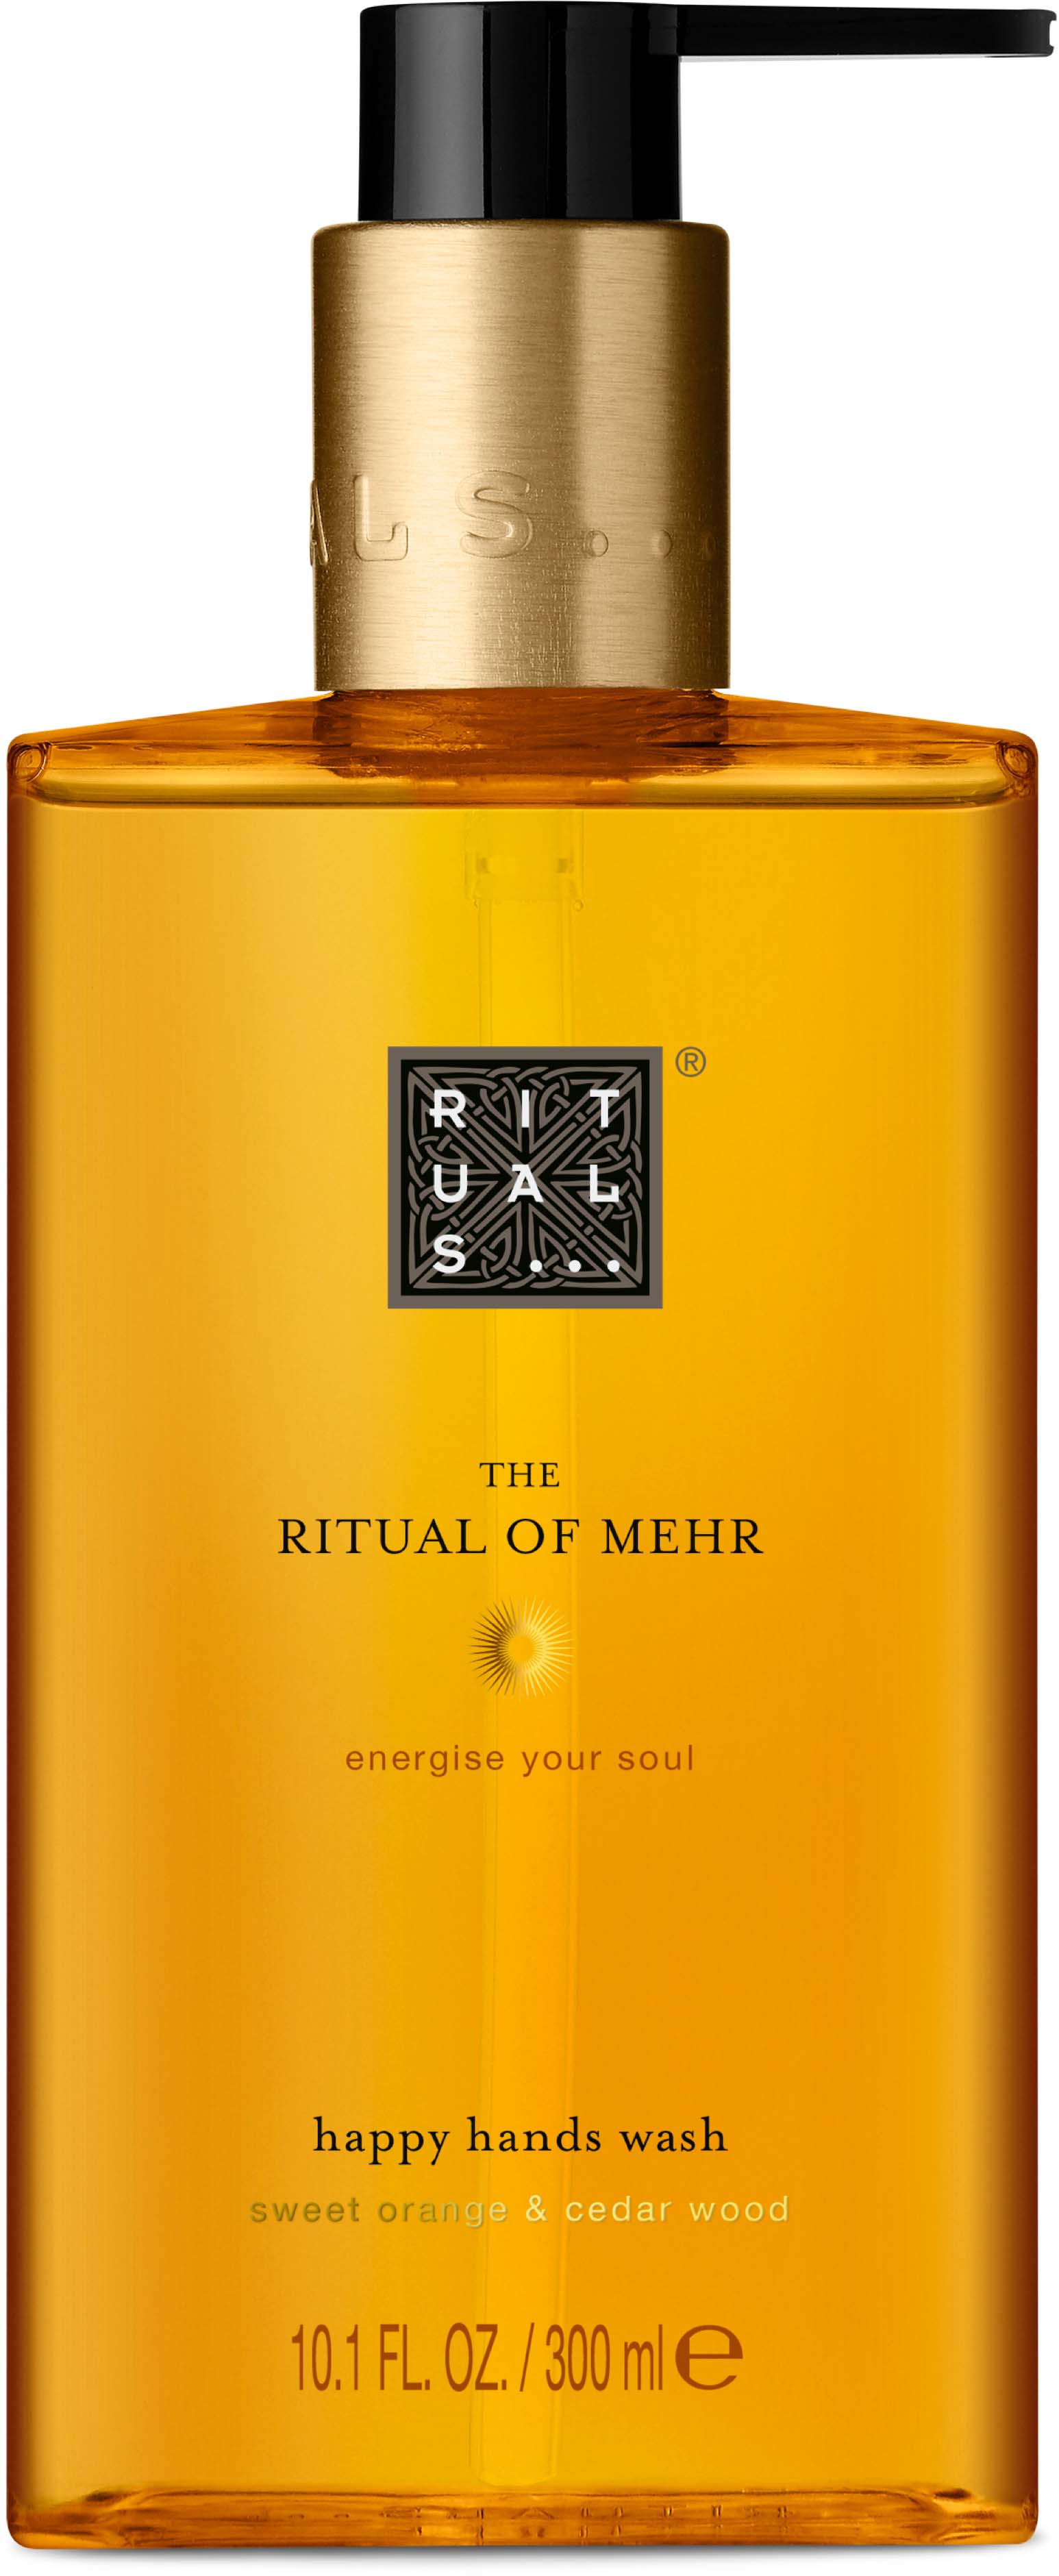 No Brand The Ritual Of Mehr Hand Wash 300 ml